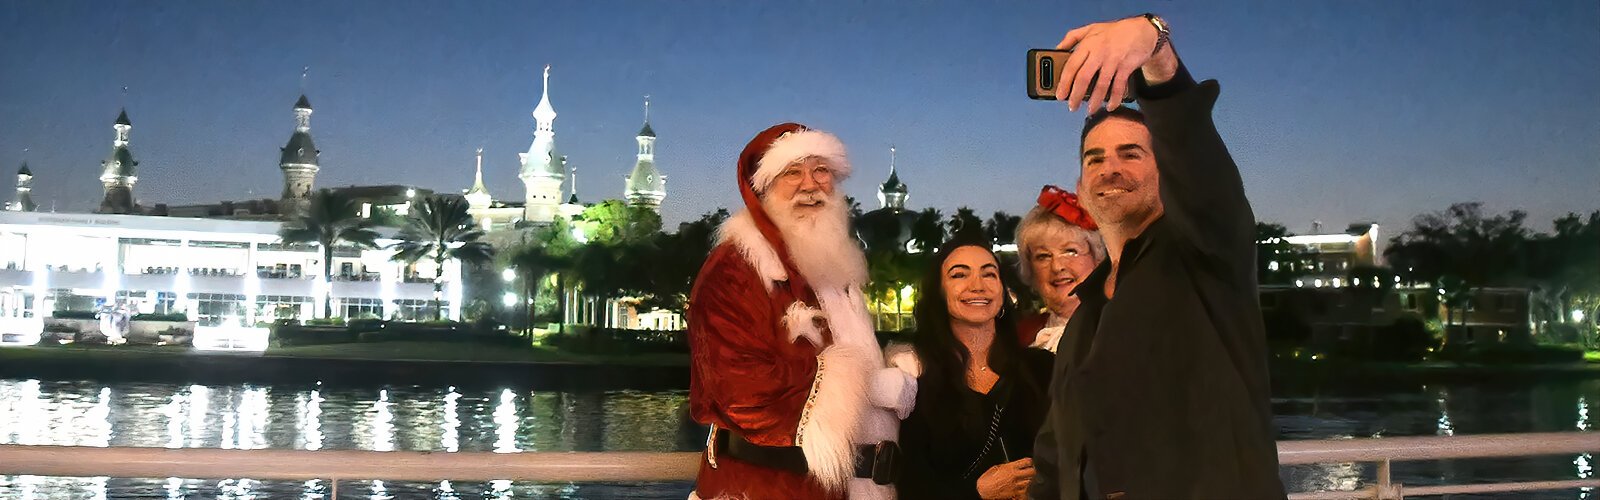 Joseph and Jennifer from Tampa seize the occasion to take a selfie with Santa and Mrs. Claus along the Riverwalk.